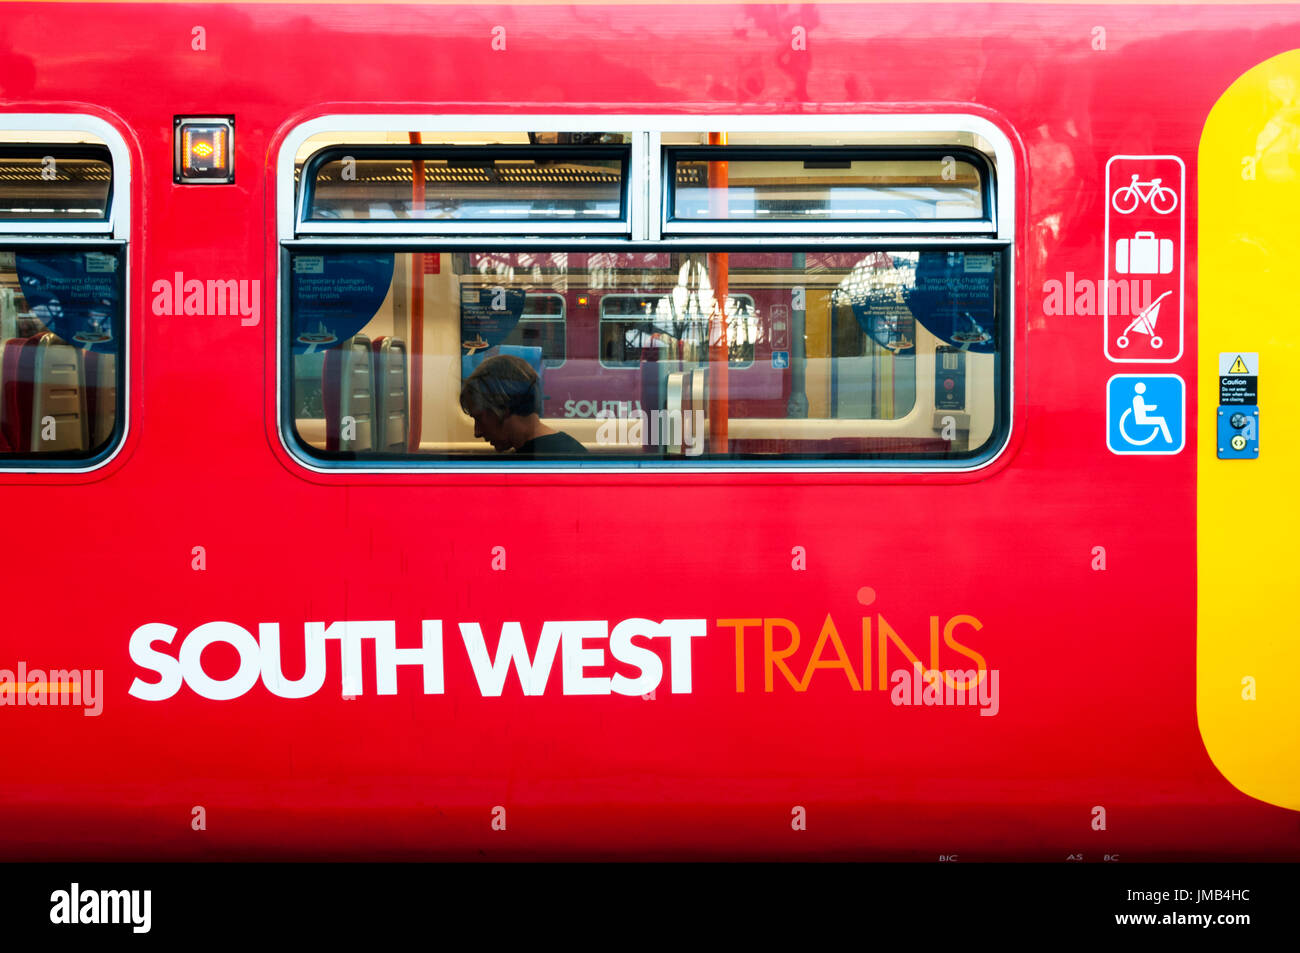 A train in the South West Trains livery with the company's logo on the side of a passenger compartment. Stock Photo